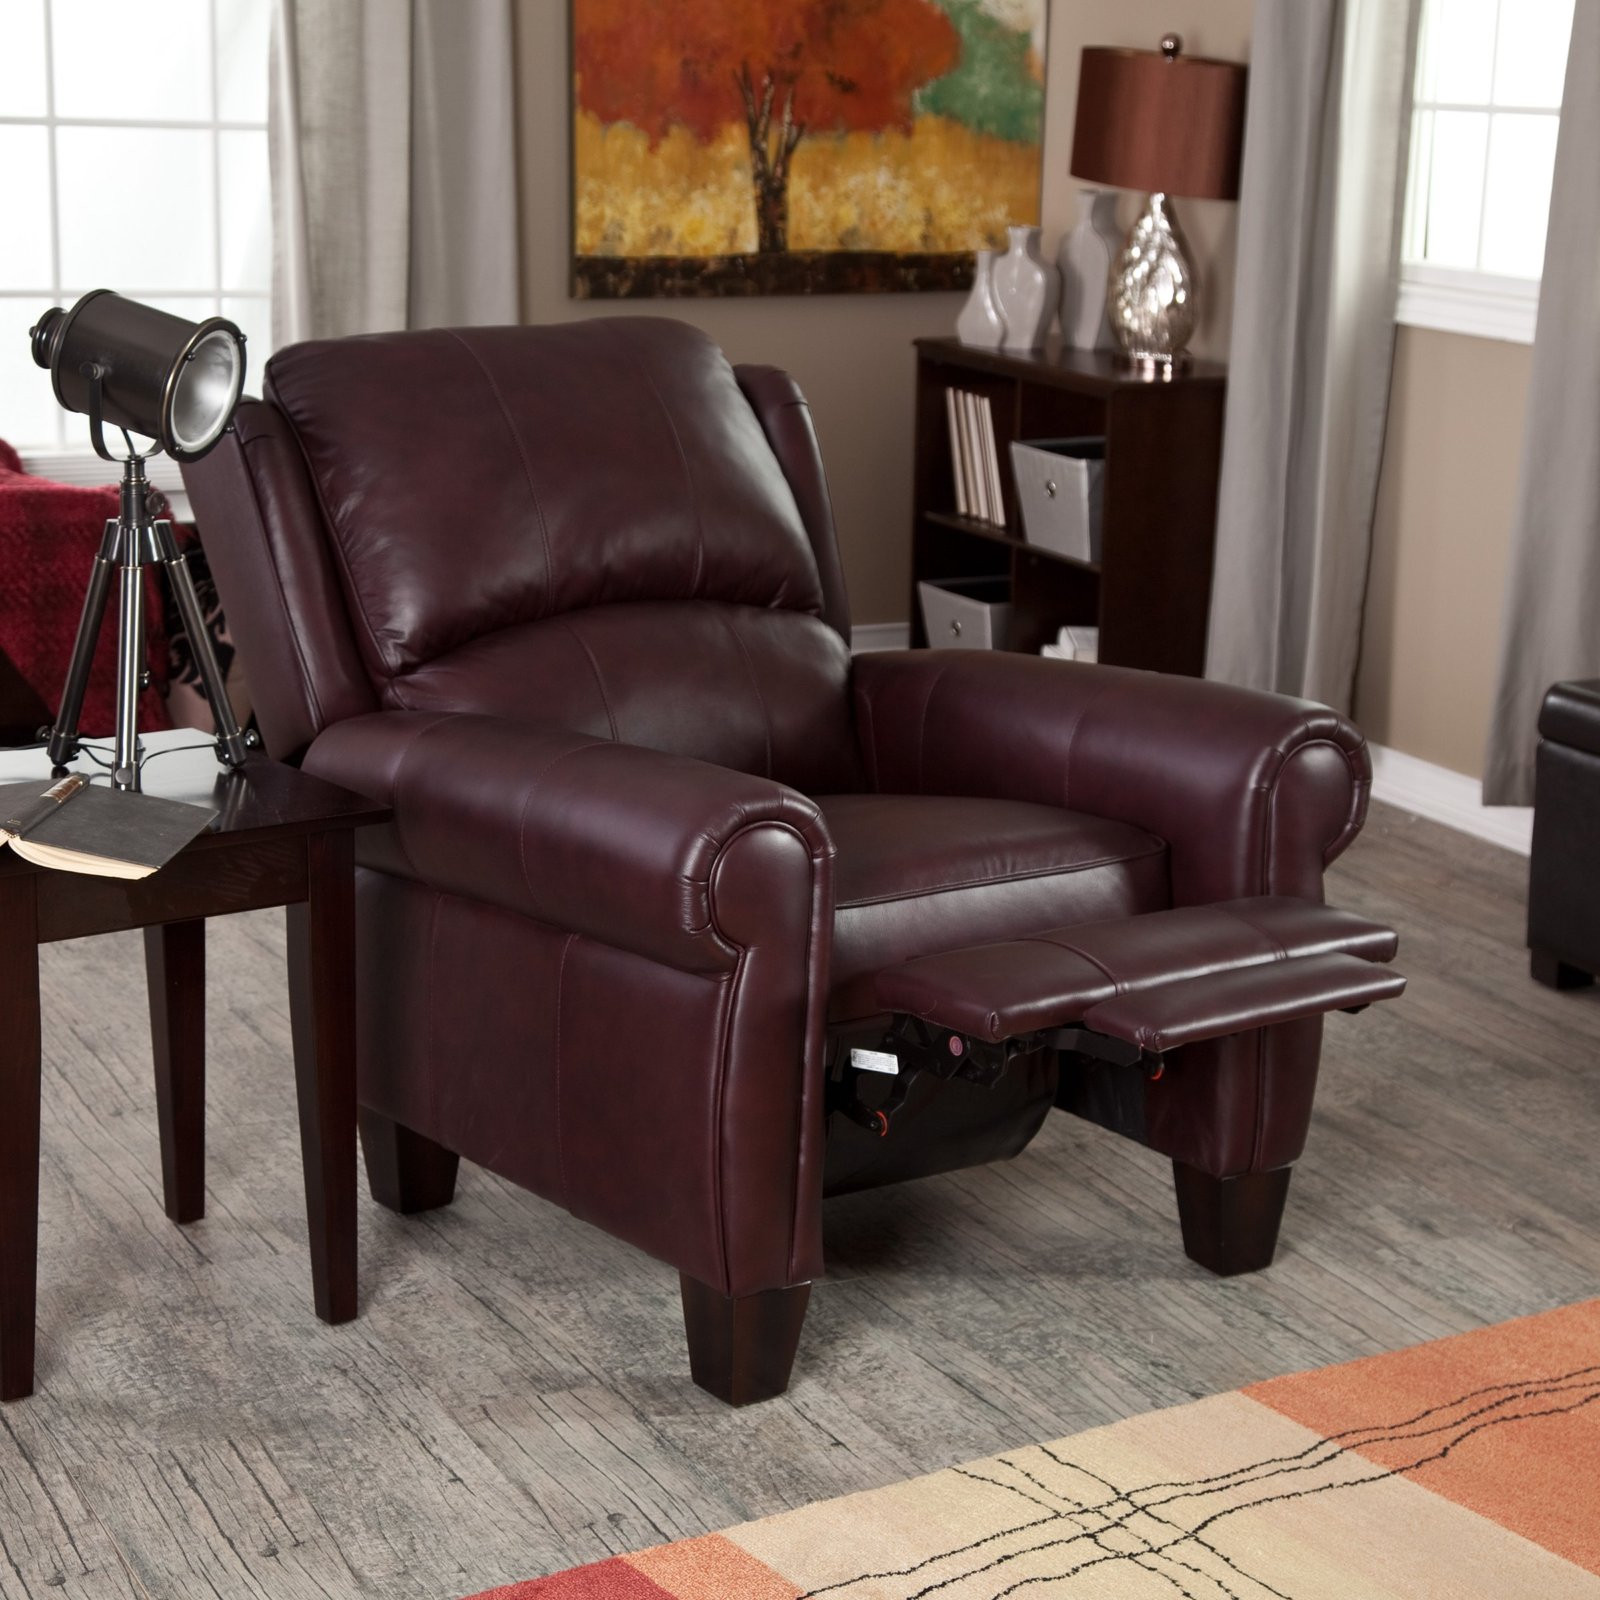 Wing Chairs For Living Room
 Leather Recliner Chair Home Burgundy Push Back Wingback